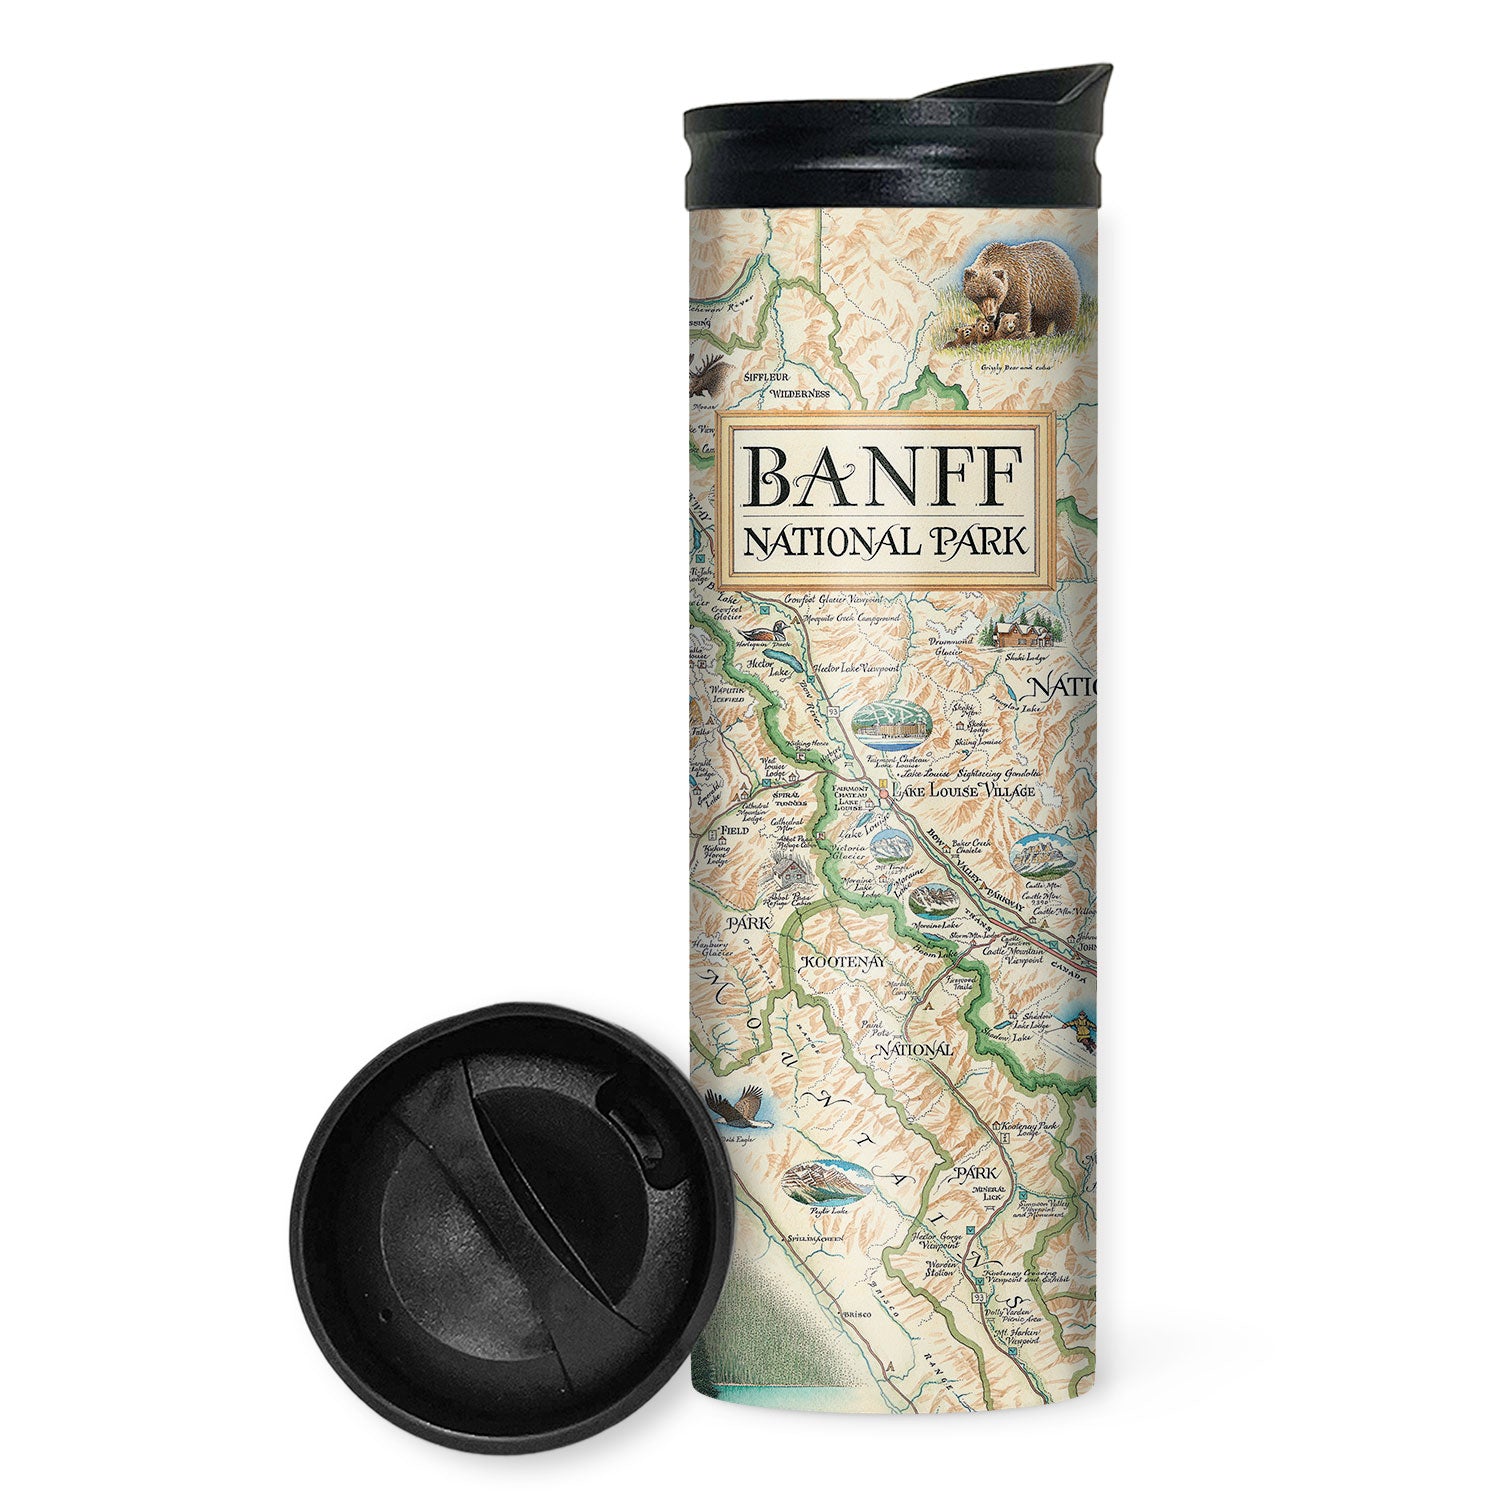 Banff National Park Map Travel Drinkware by Xplorer Maps. Featuring grizzly bears, elk, mountain lions, and wolves. The map also features Jasper National Park, Yoho National Park, and Kootenay National Park. The featured illustration of the map is Lake Louise.